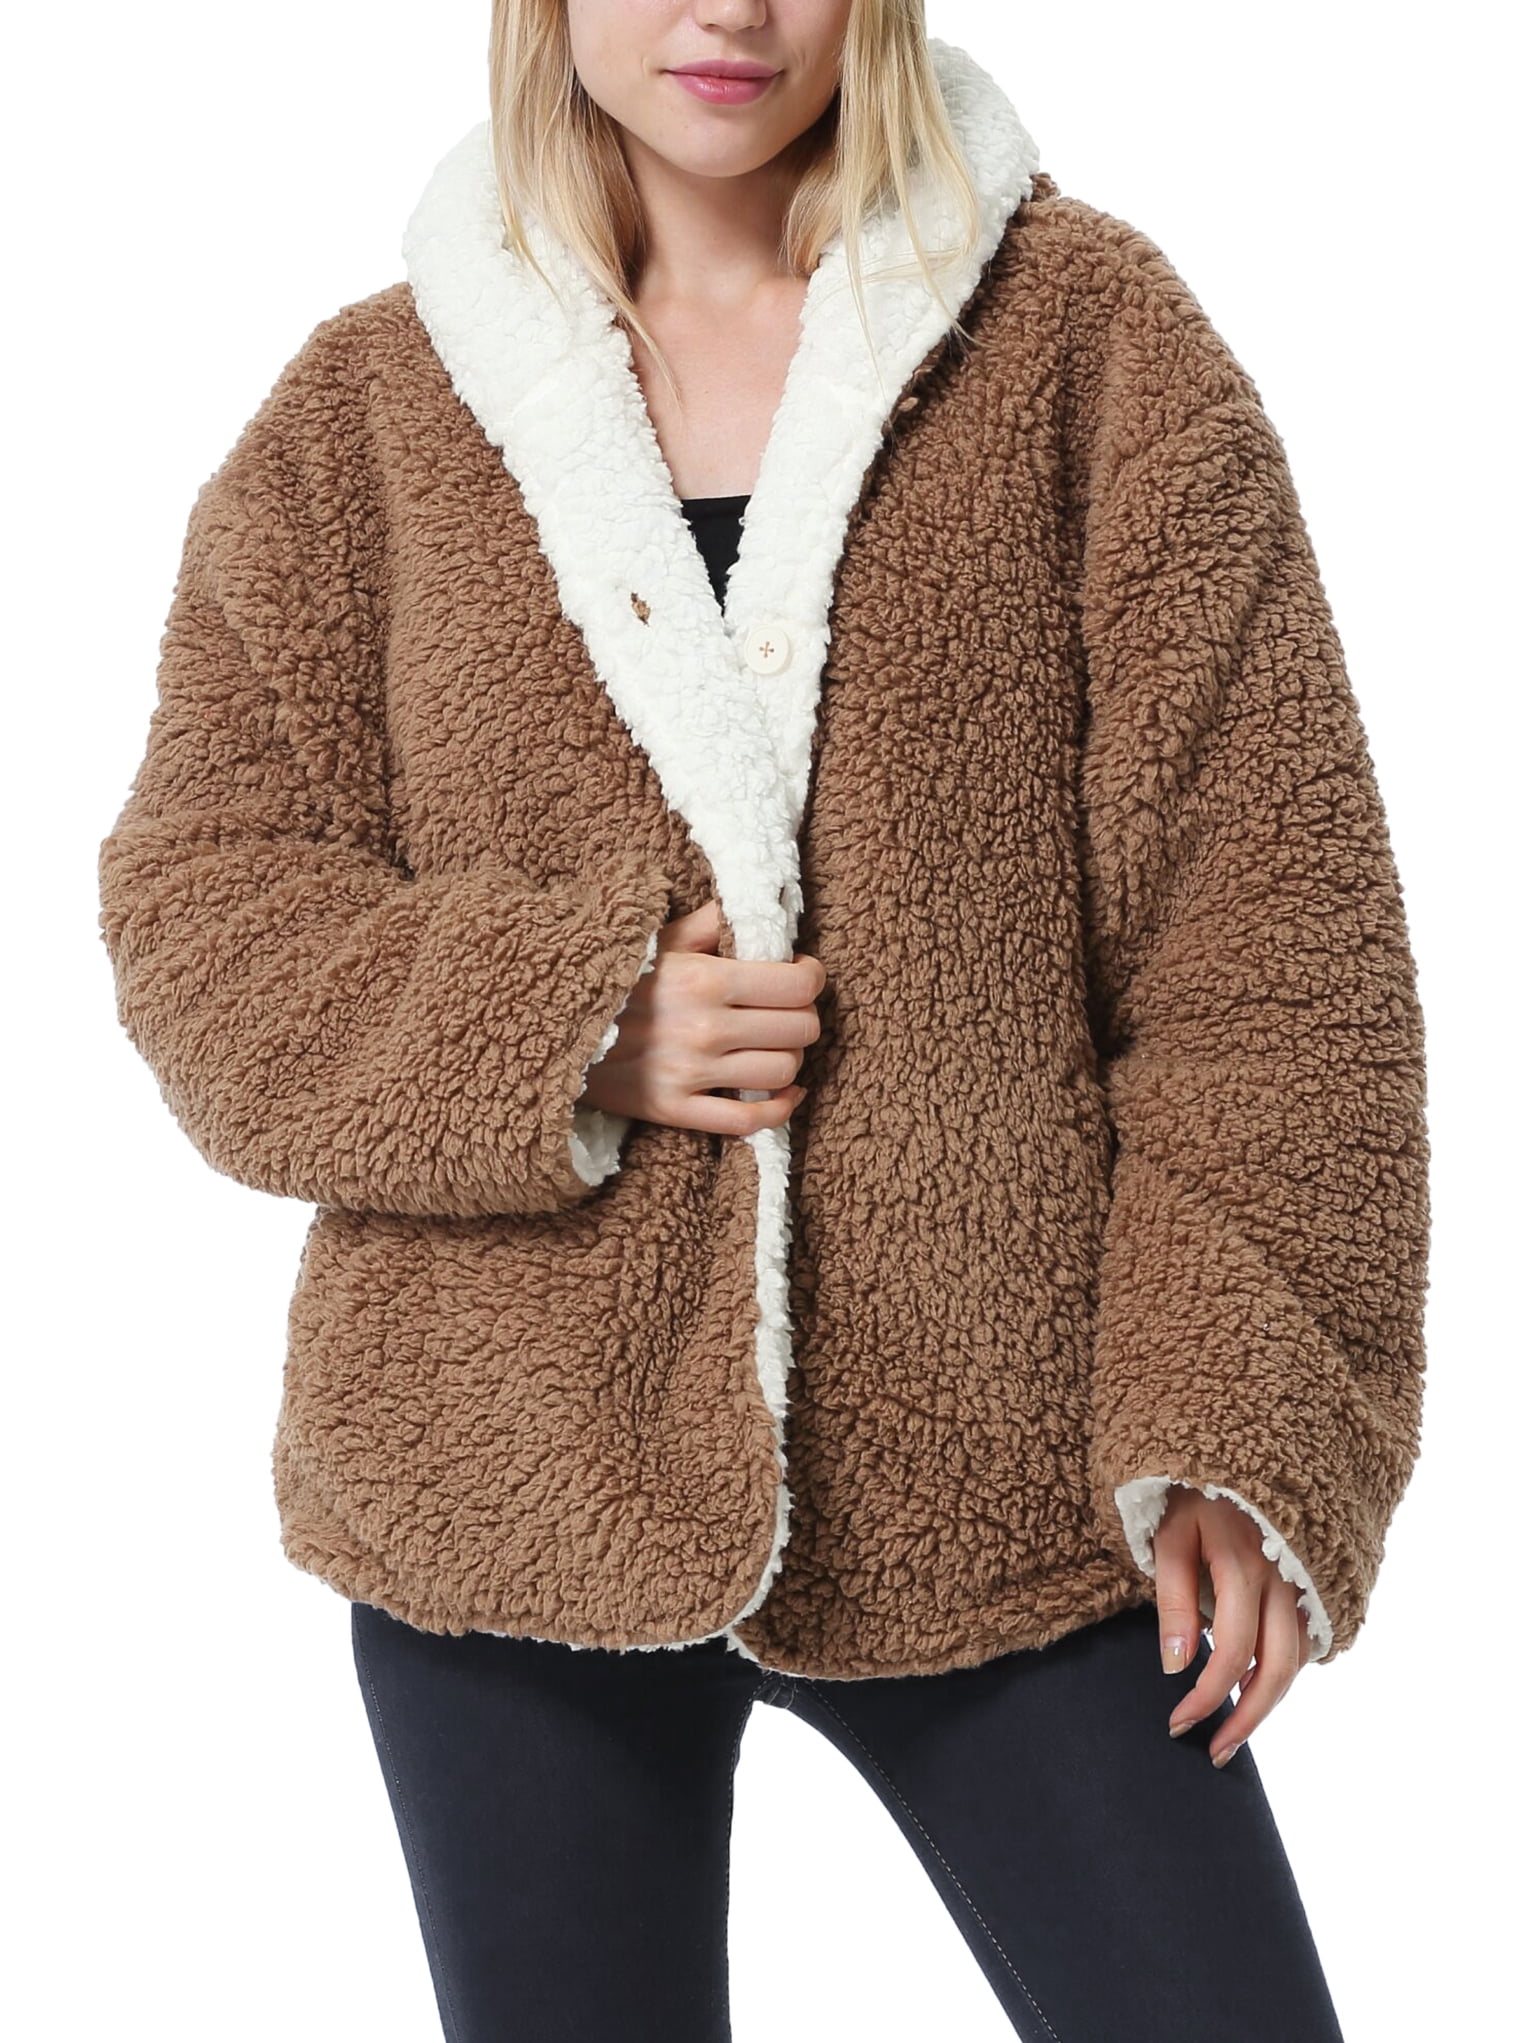 Catalonia One Size Women Teddy Hooded Jacket Pullover, Super Soft Cozy  Sherpa Reversible Casual Winter Blanket Jackets Hoodie Brown Cropped 